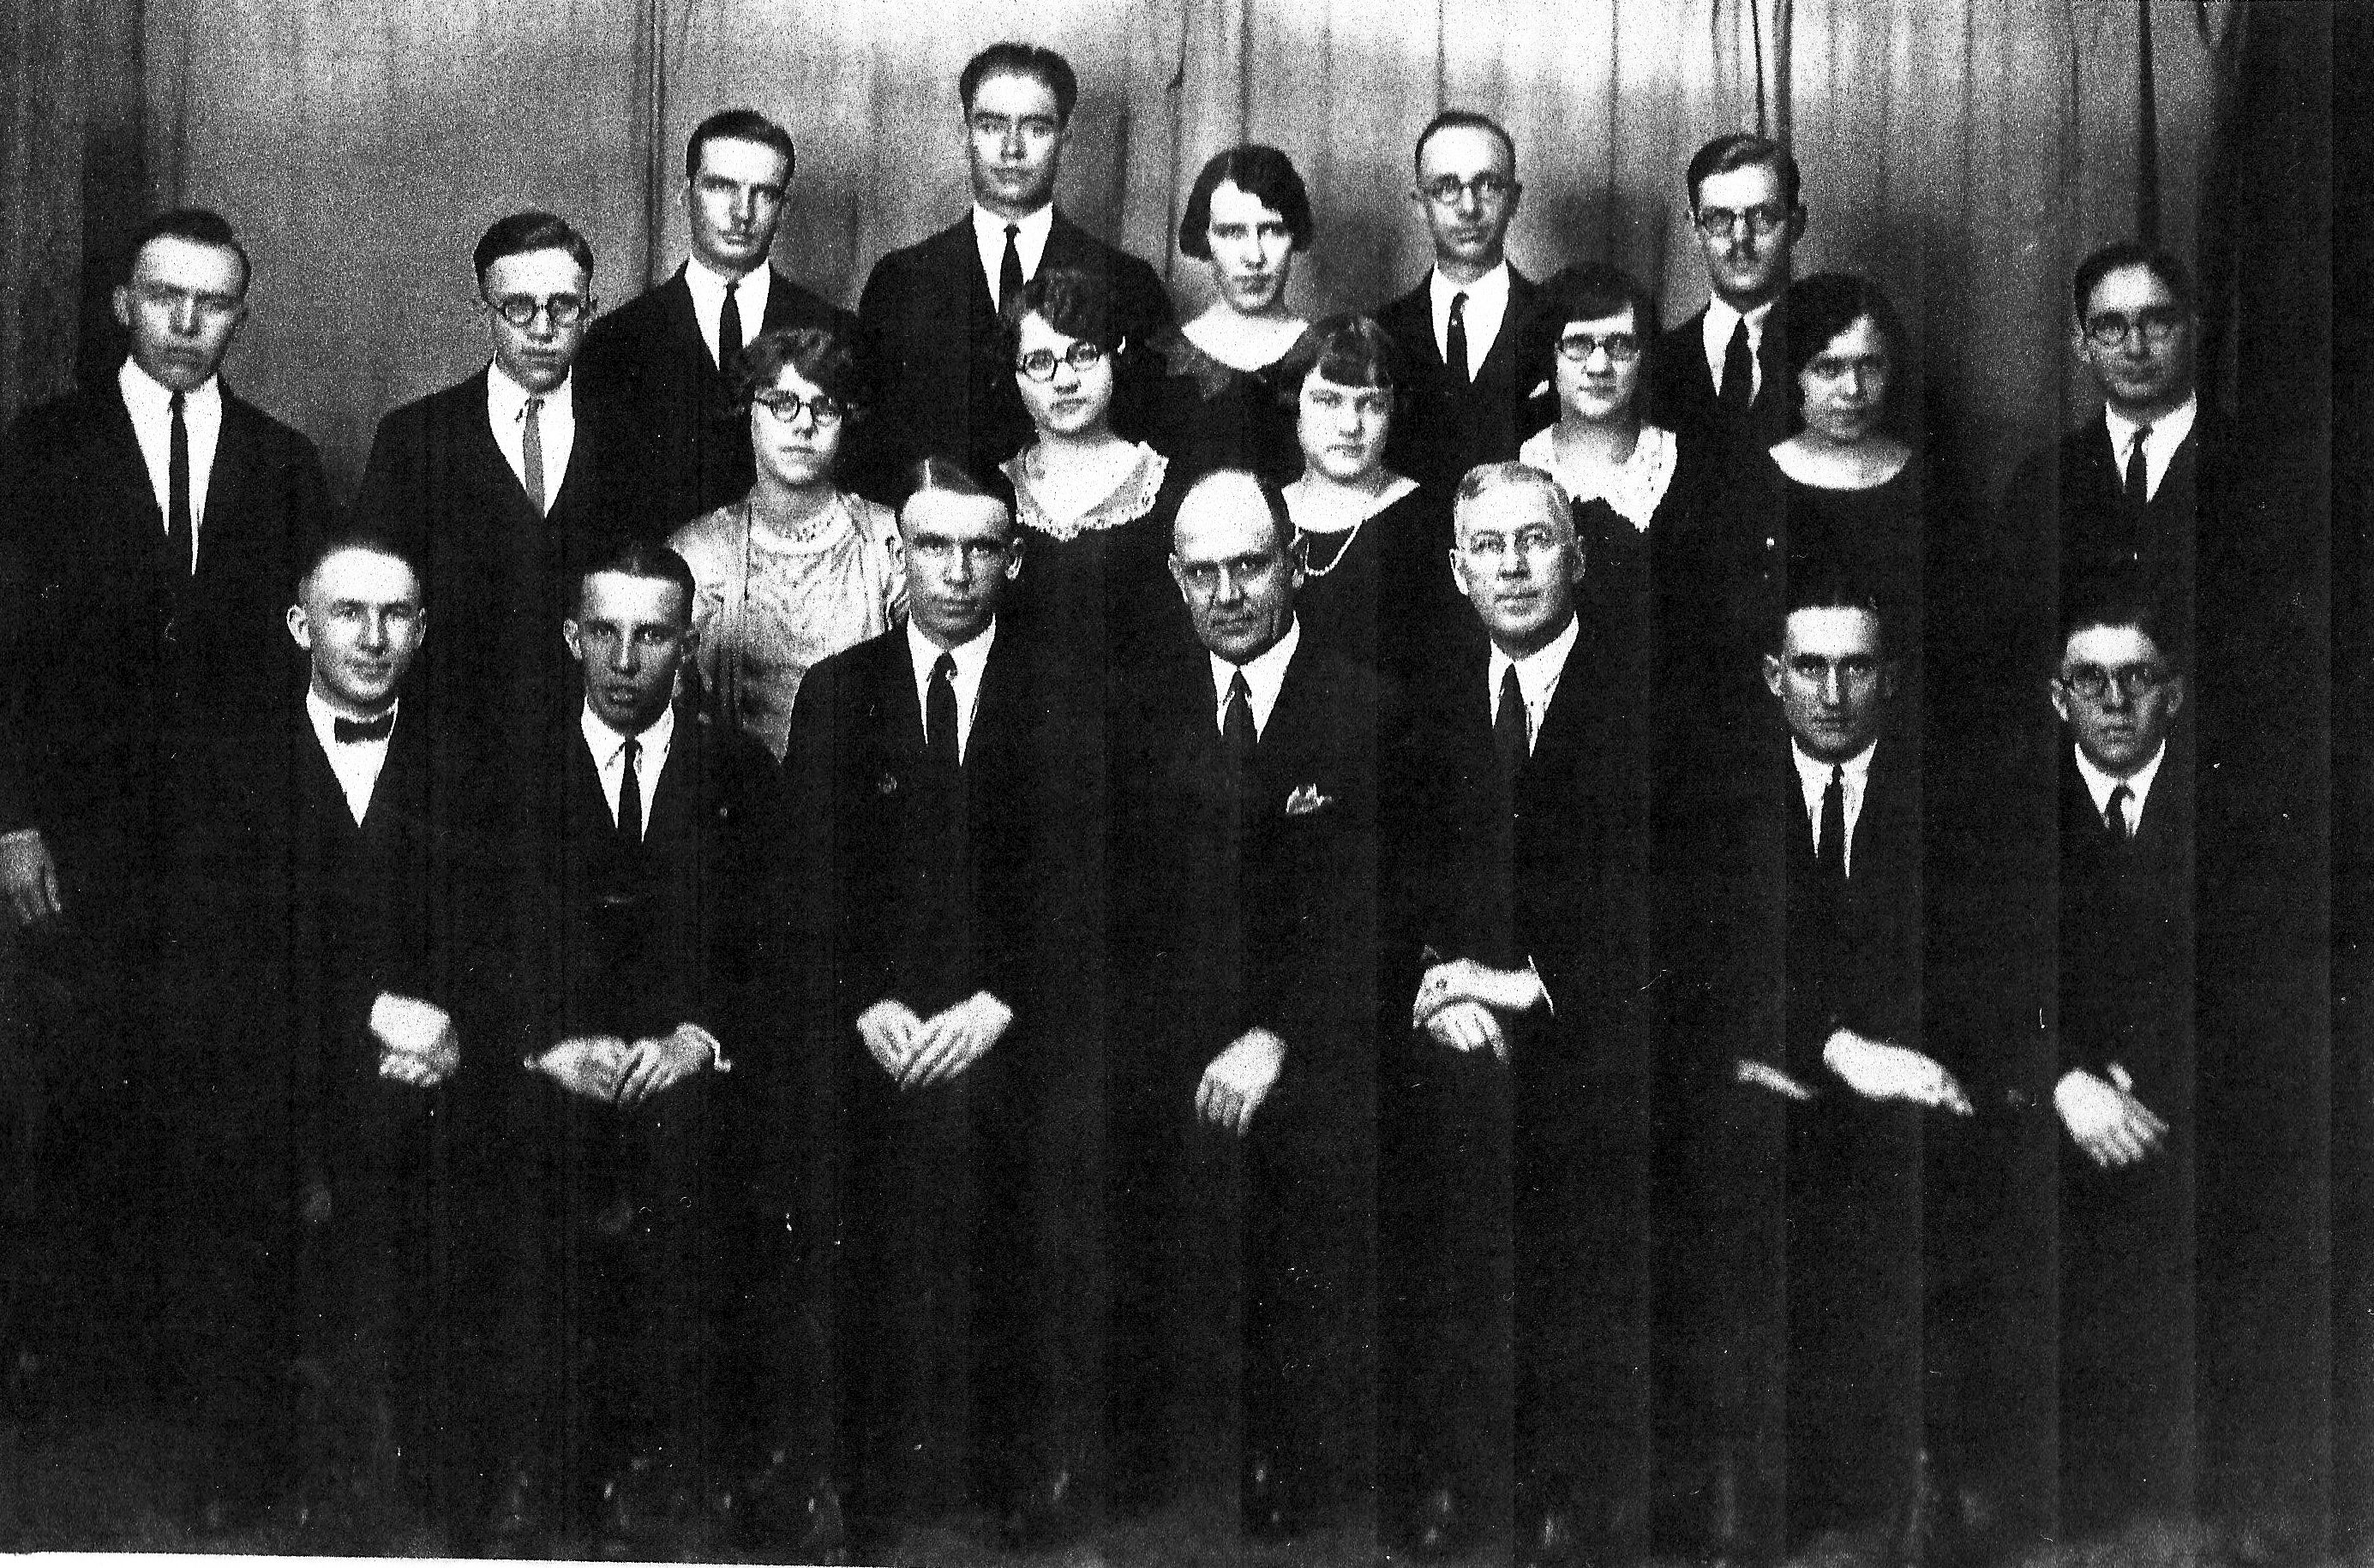 20 October 1925, Southern Indiana Mission Conference